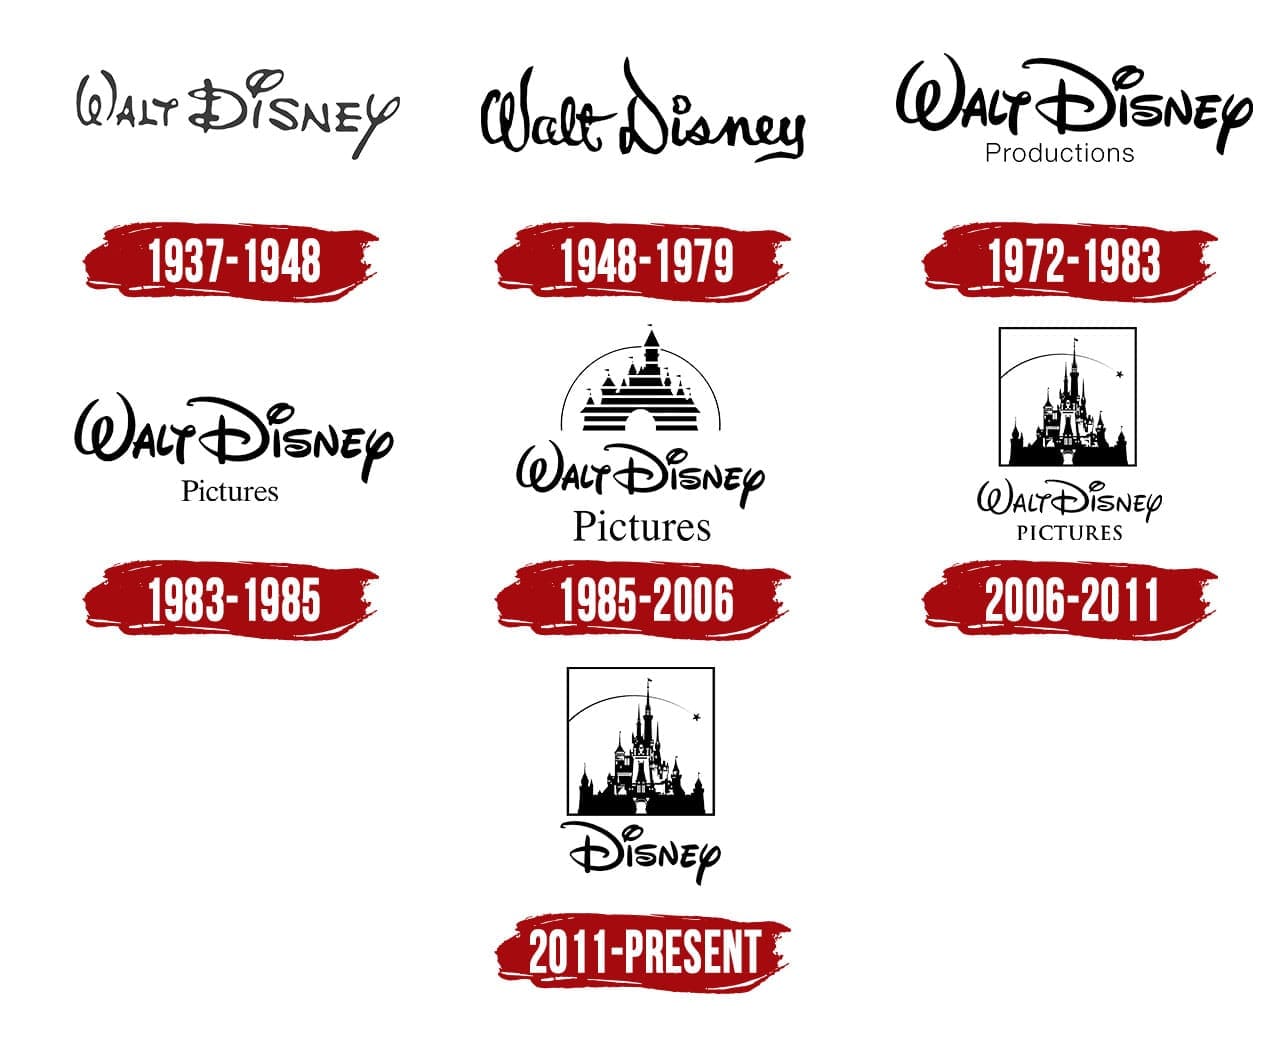 Walt Disney Pictures Logo The Most Famous Brands And Company Logos In The World